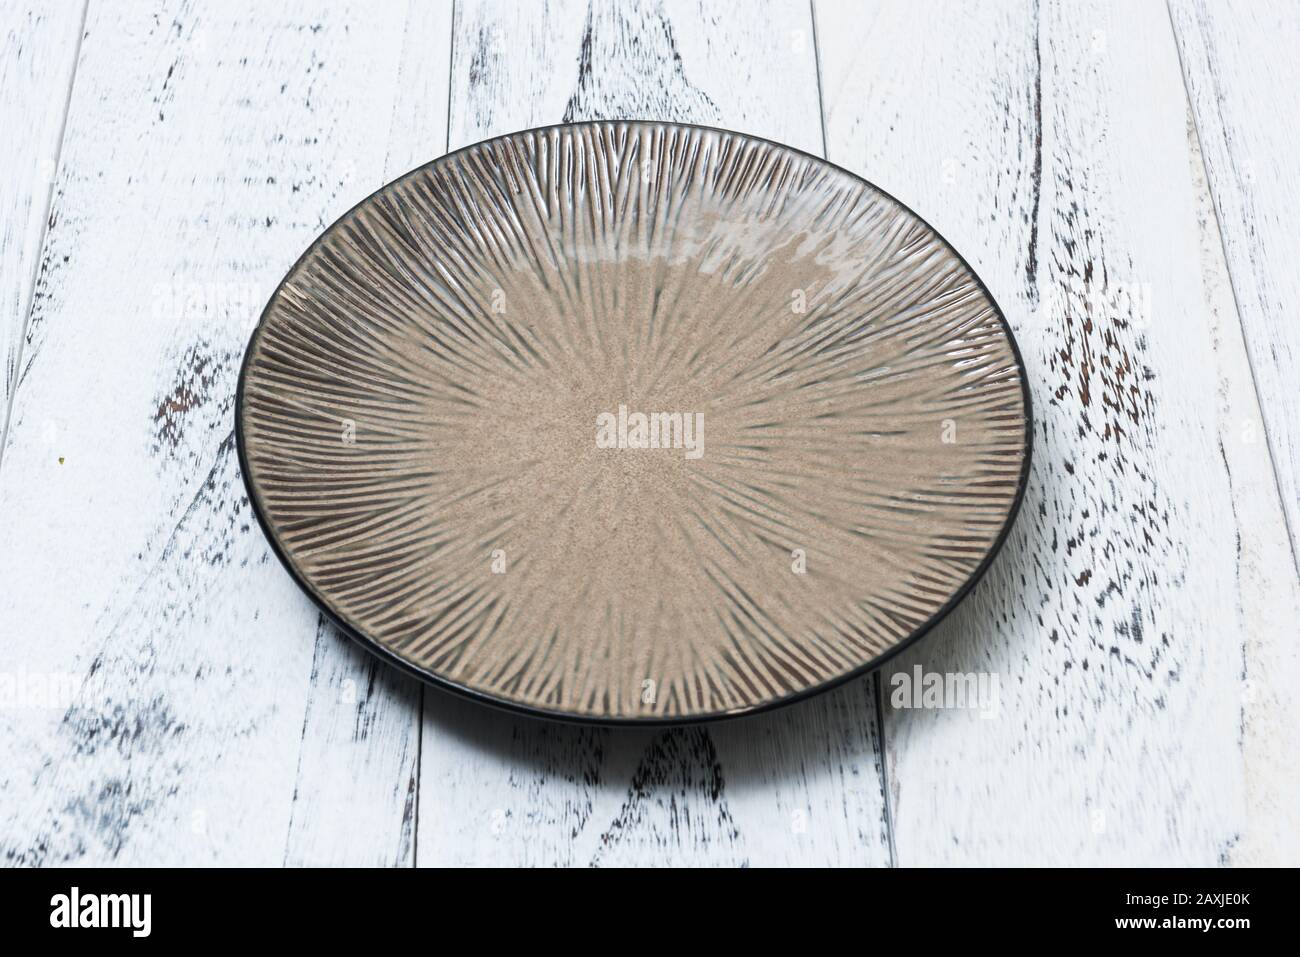 Round Plate on white abstract scraped wooden table background side view Stock Photo